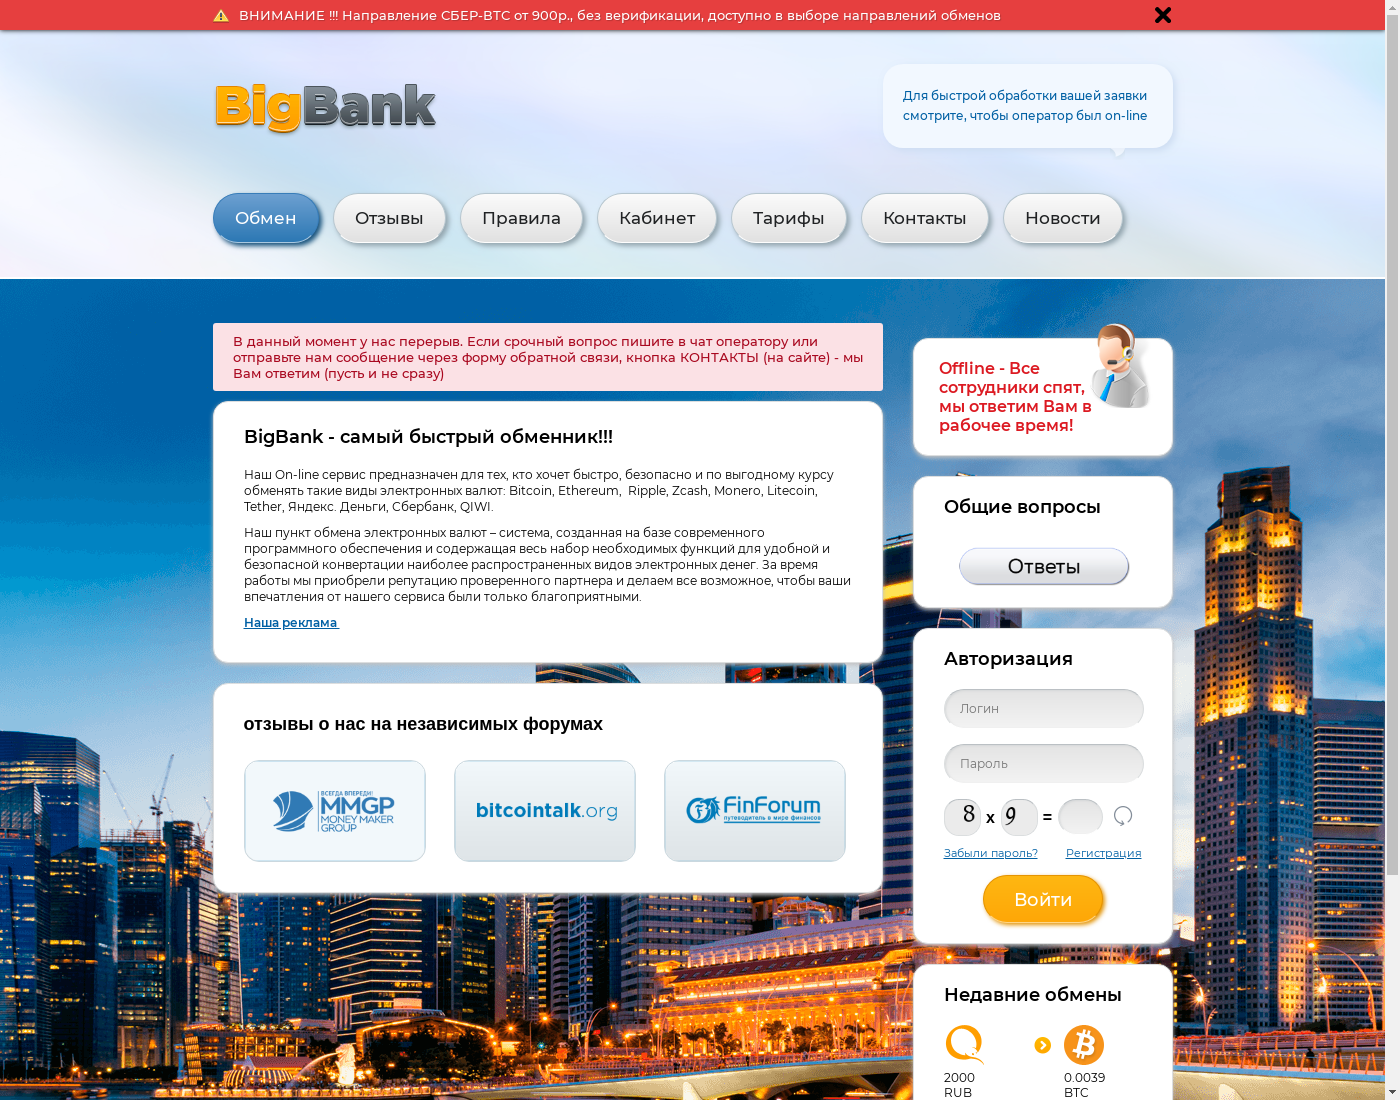 BigBank user interface: the home page in English